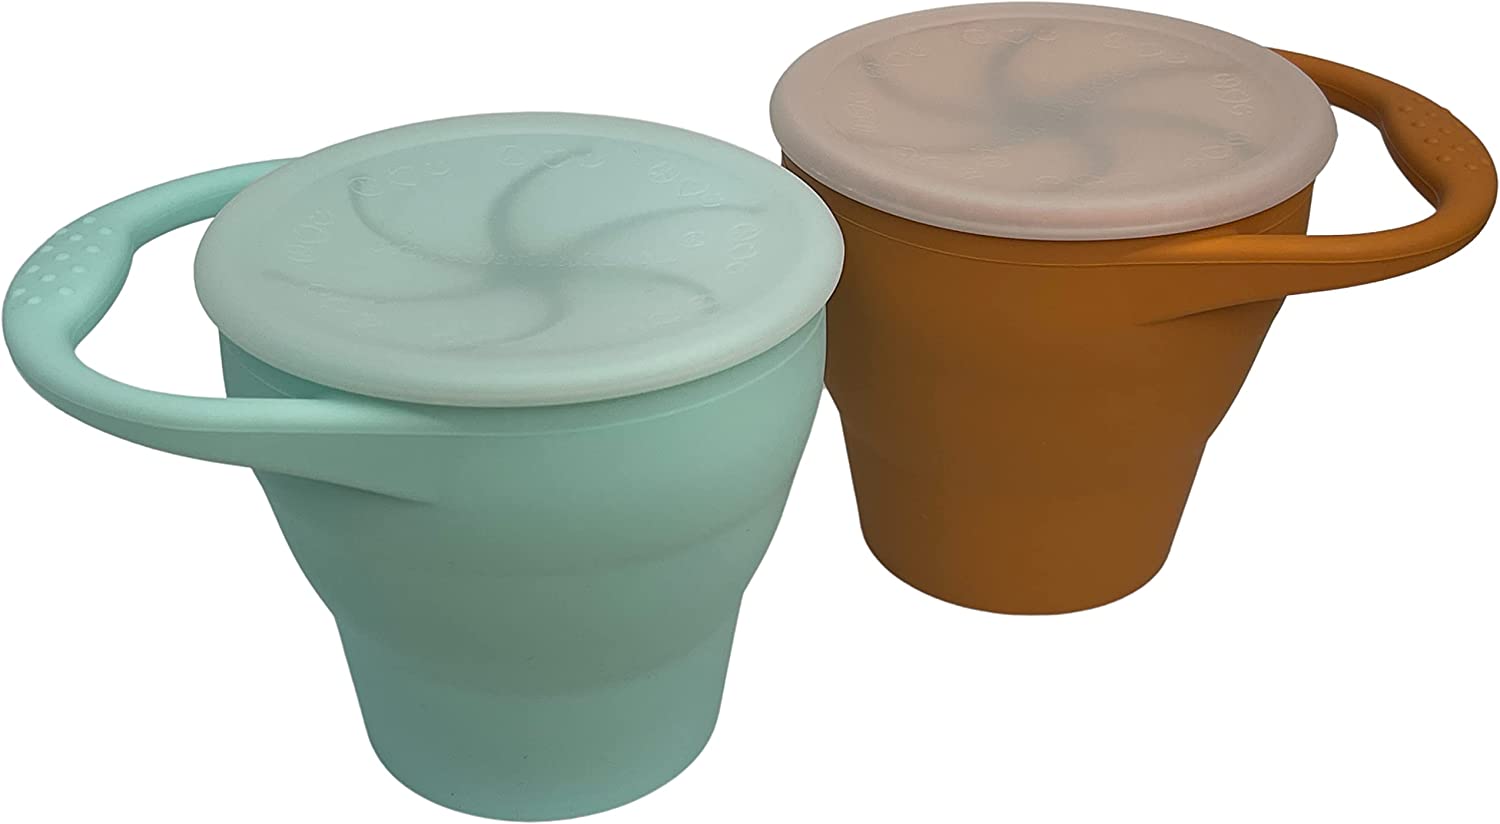 BraveJusticeKidsCo | Snack Attack Cup Collapsible Silicone Container  Toddler and Baby Catcher Lid (Mint Green)